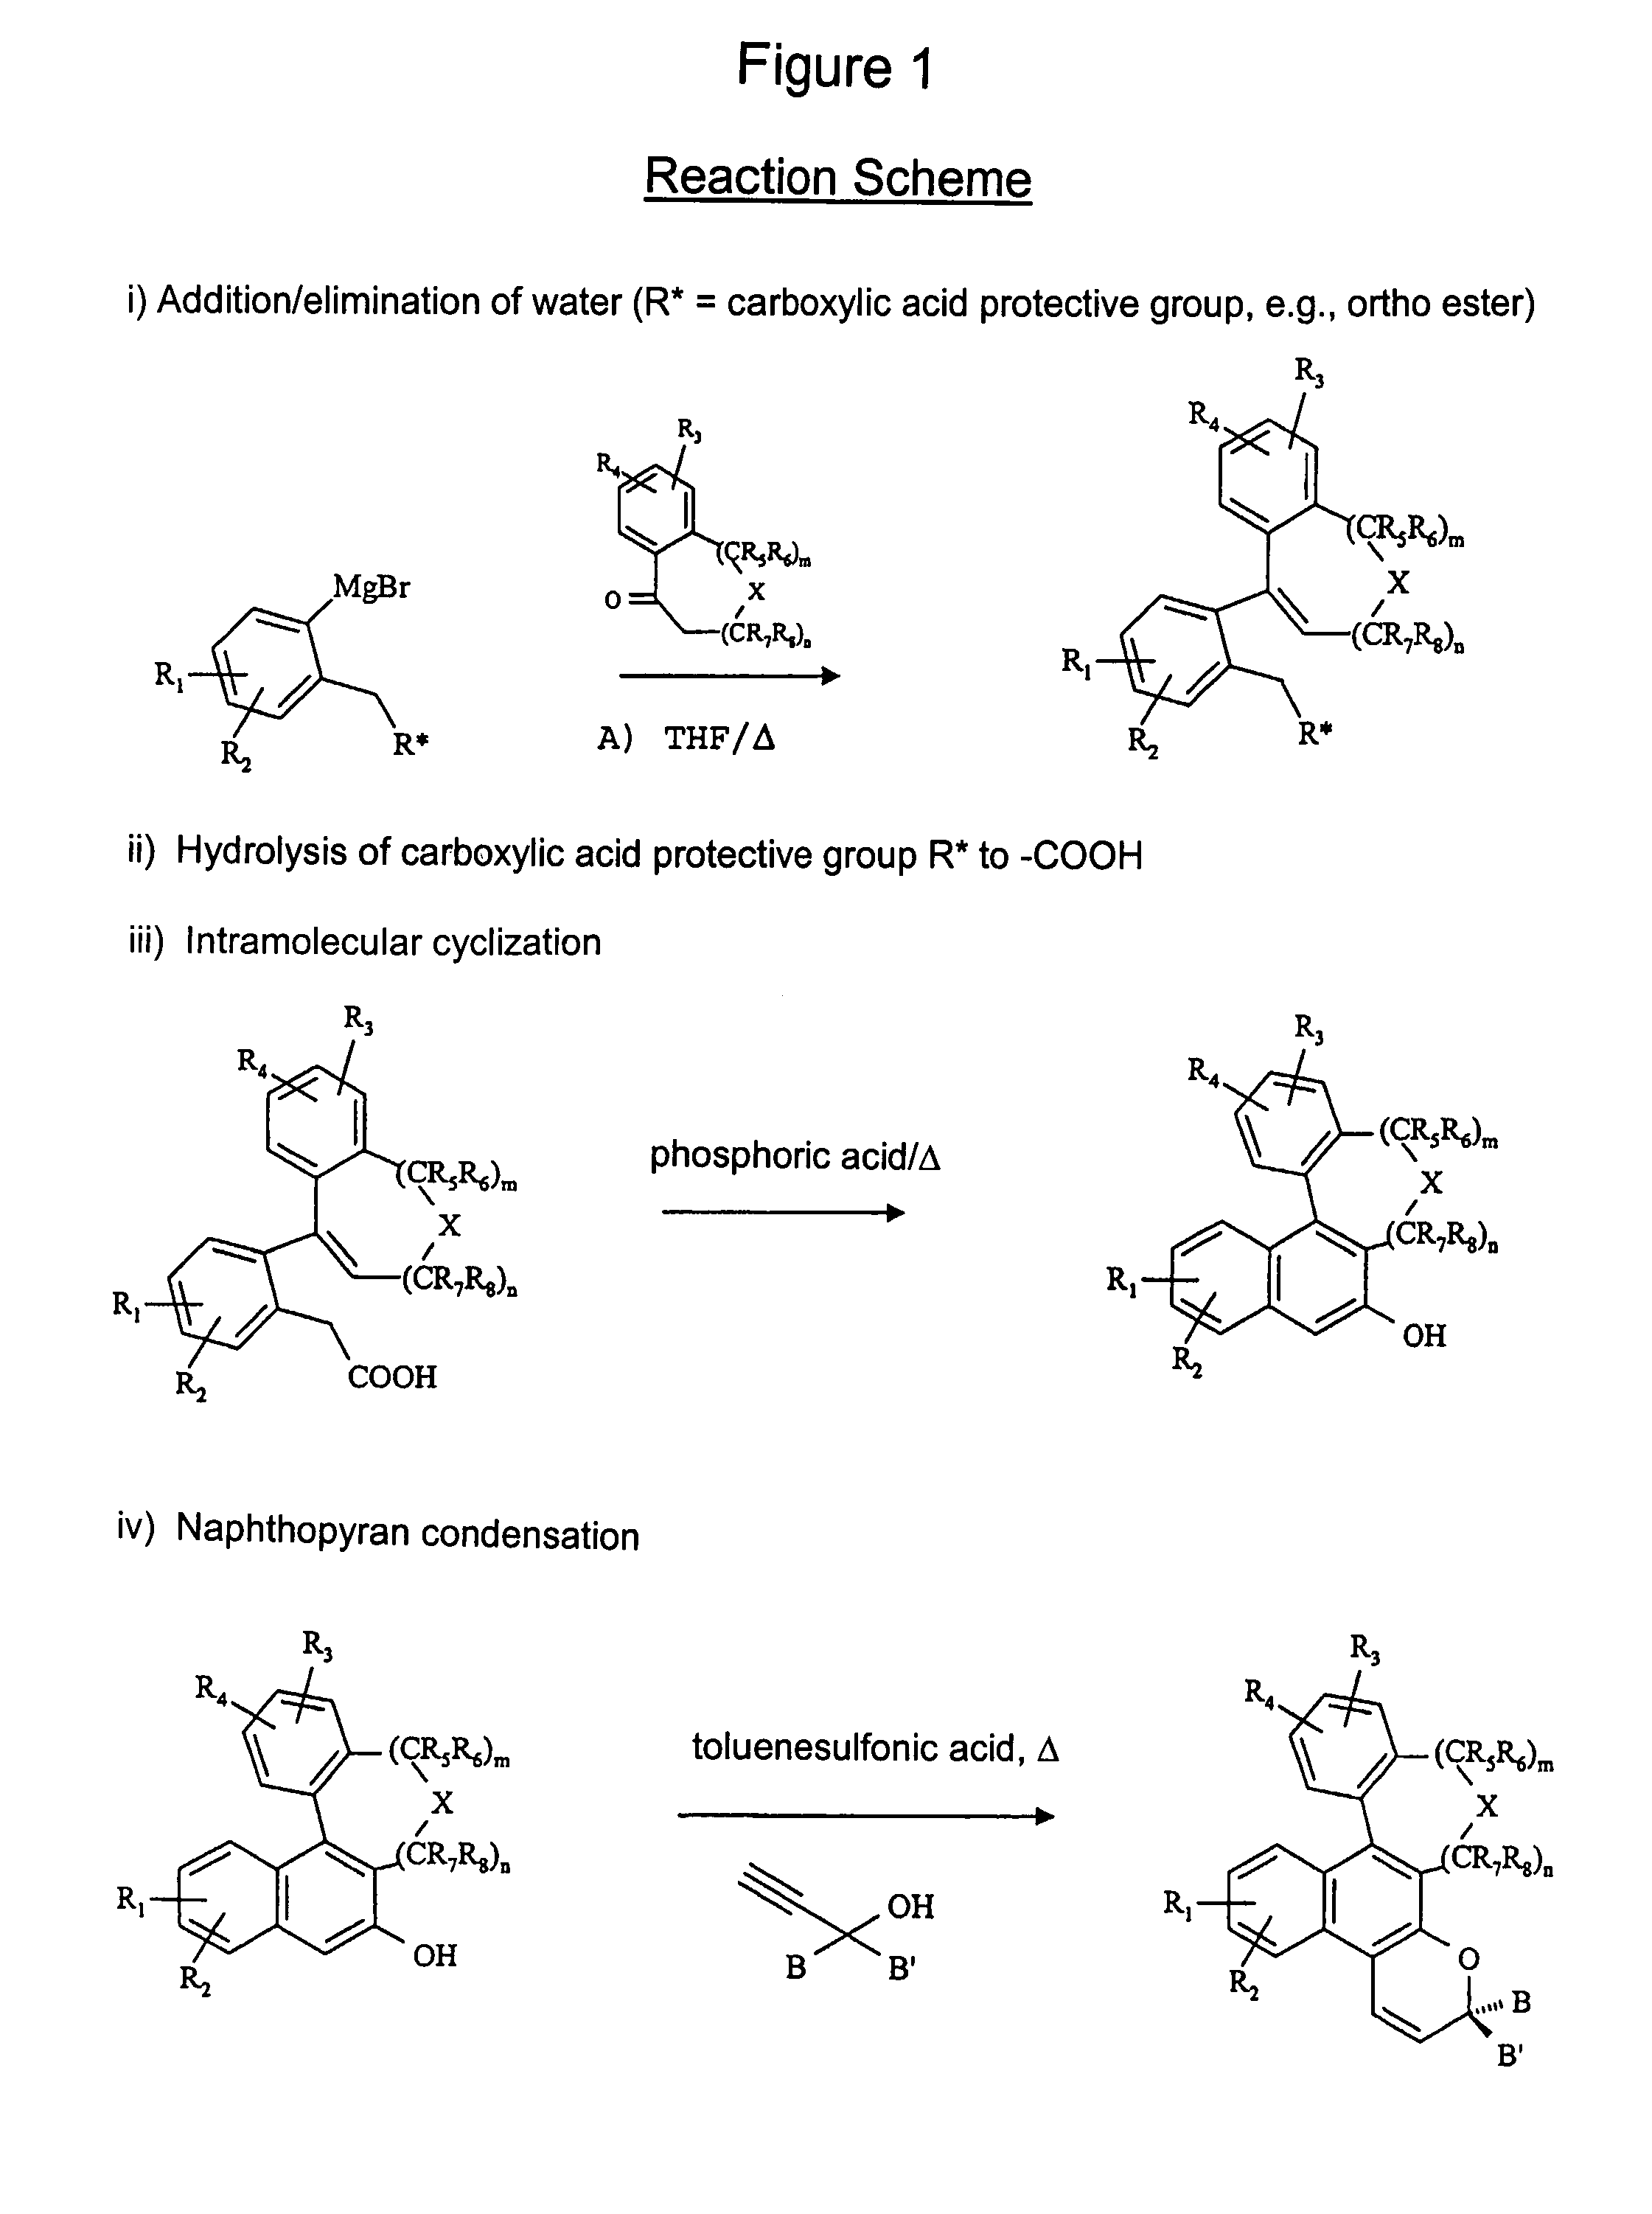 Photochromic h-annellated benzo[f]chromene compounds